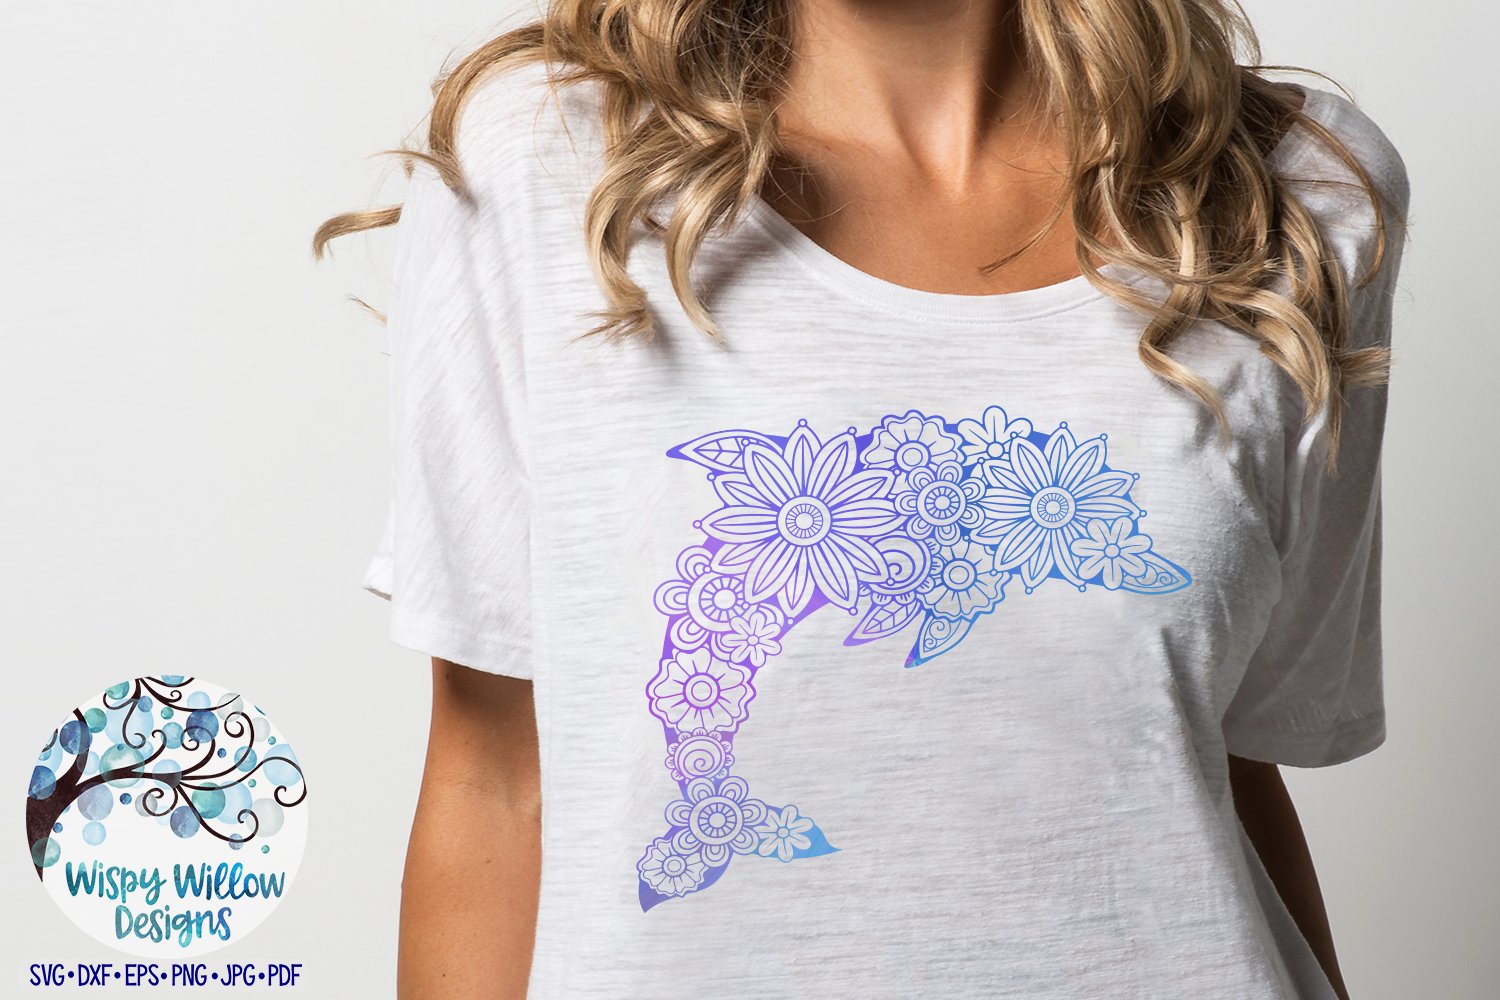 T-shirt with a dolphin print made of flowers.